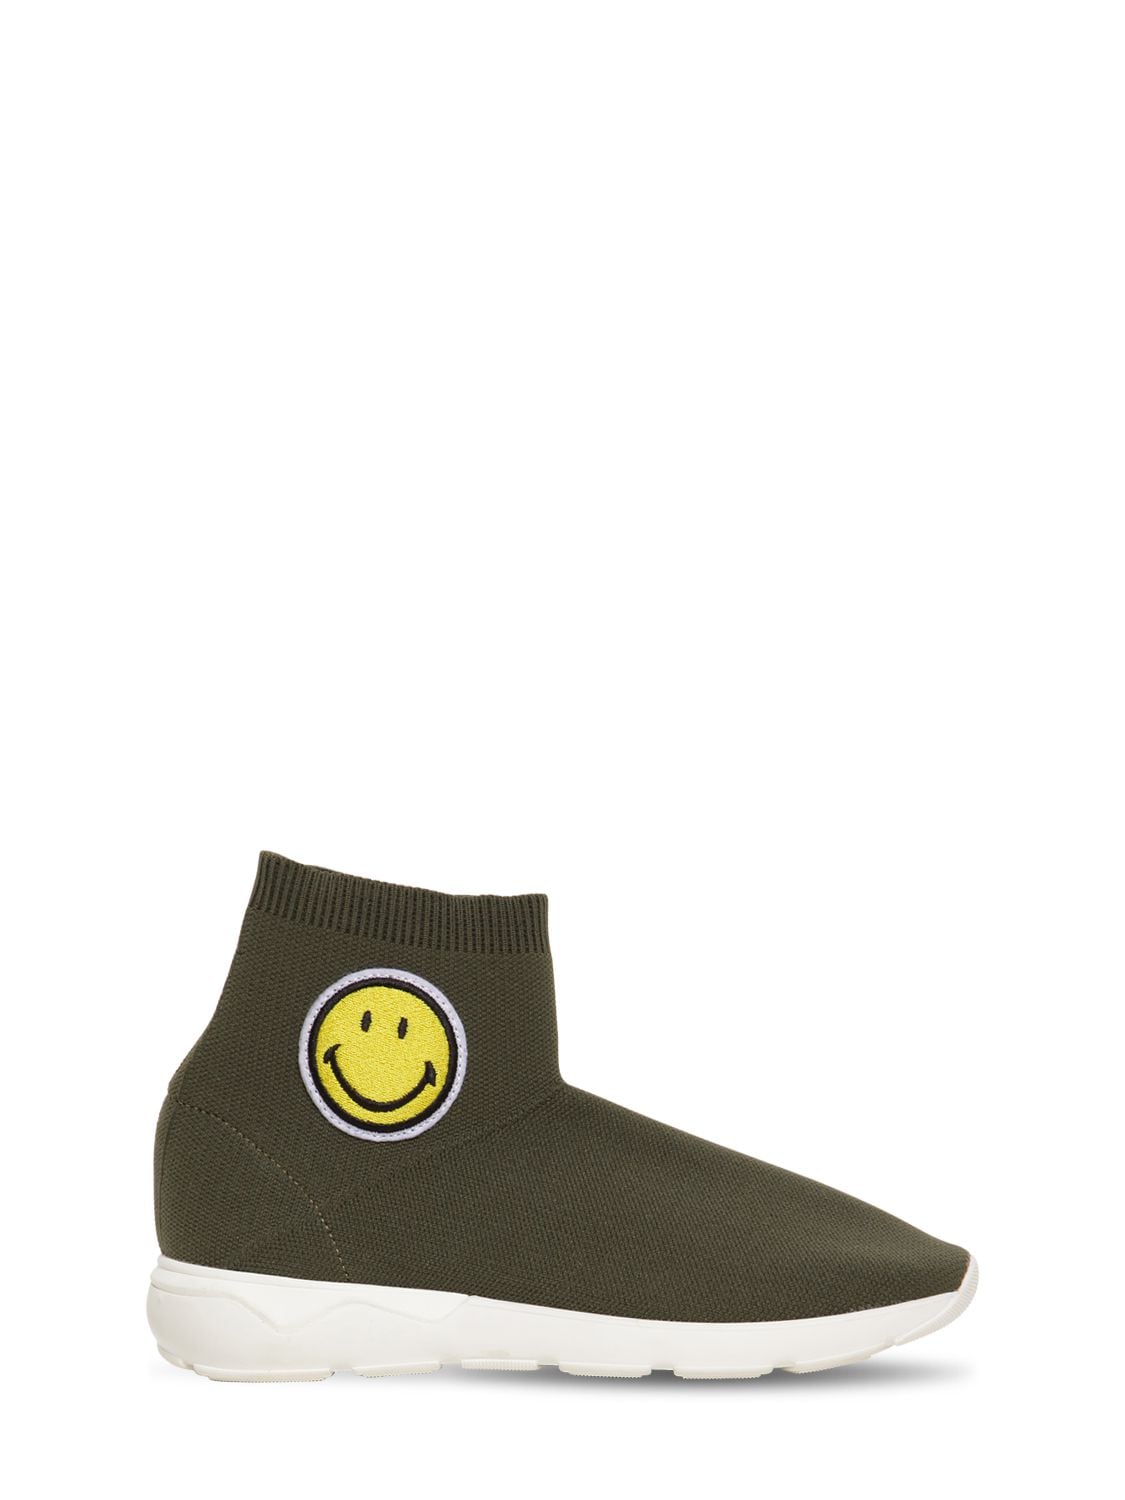 Luisaviaroma Fille Chaussures Mocassins Baskets Slip-on En Tricot Avec Patch Smiley 